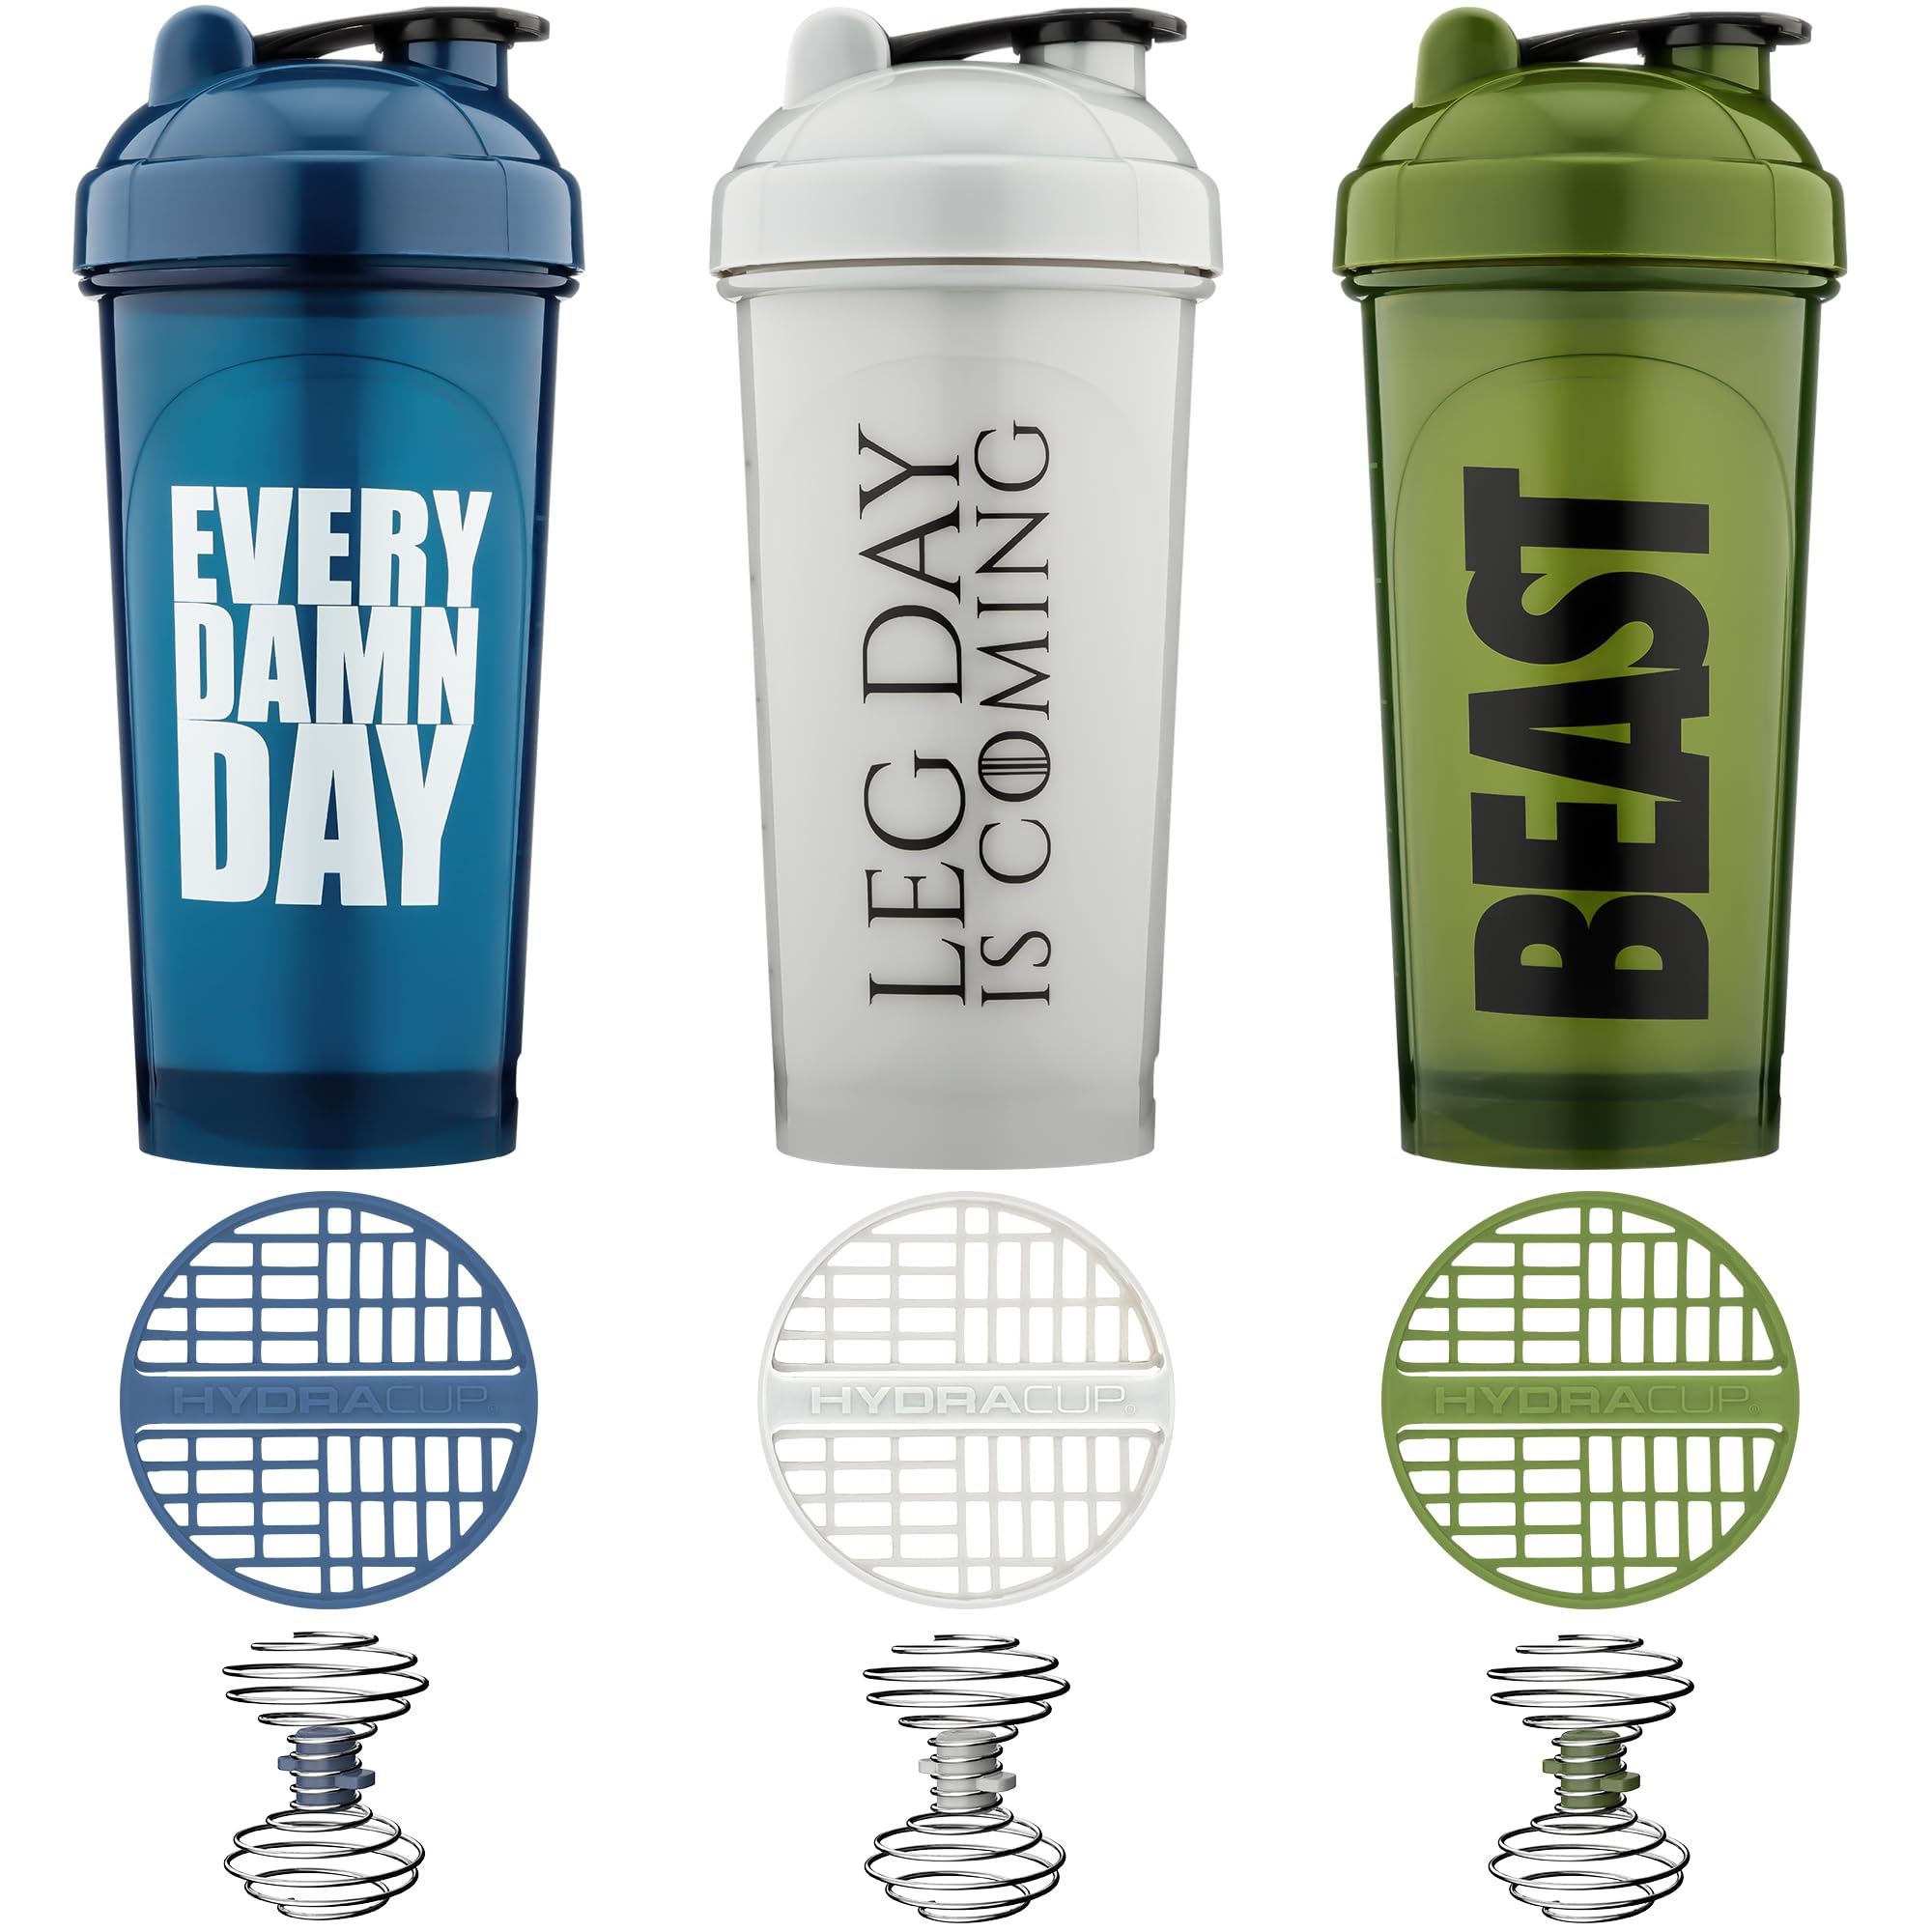 Hydra Cup OG Logo [5 Pack] 28 oz Shaker Bottles for Protein Shakes, Shaker Cups with Ball Blender Whisk, Travel To Go, BPA Free (Dark Colors)